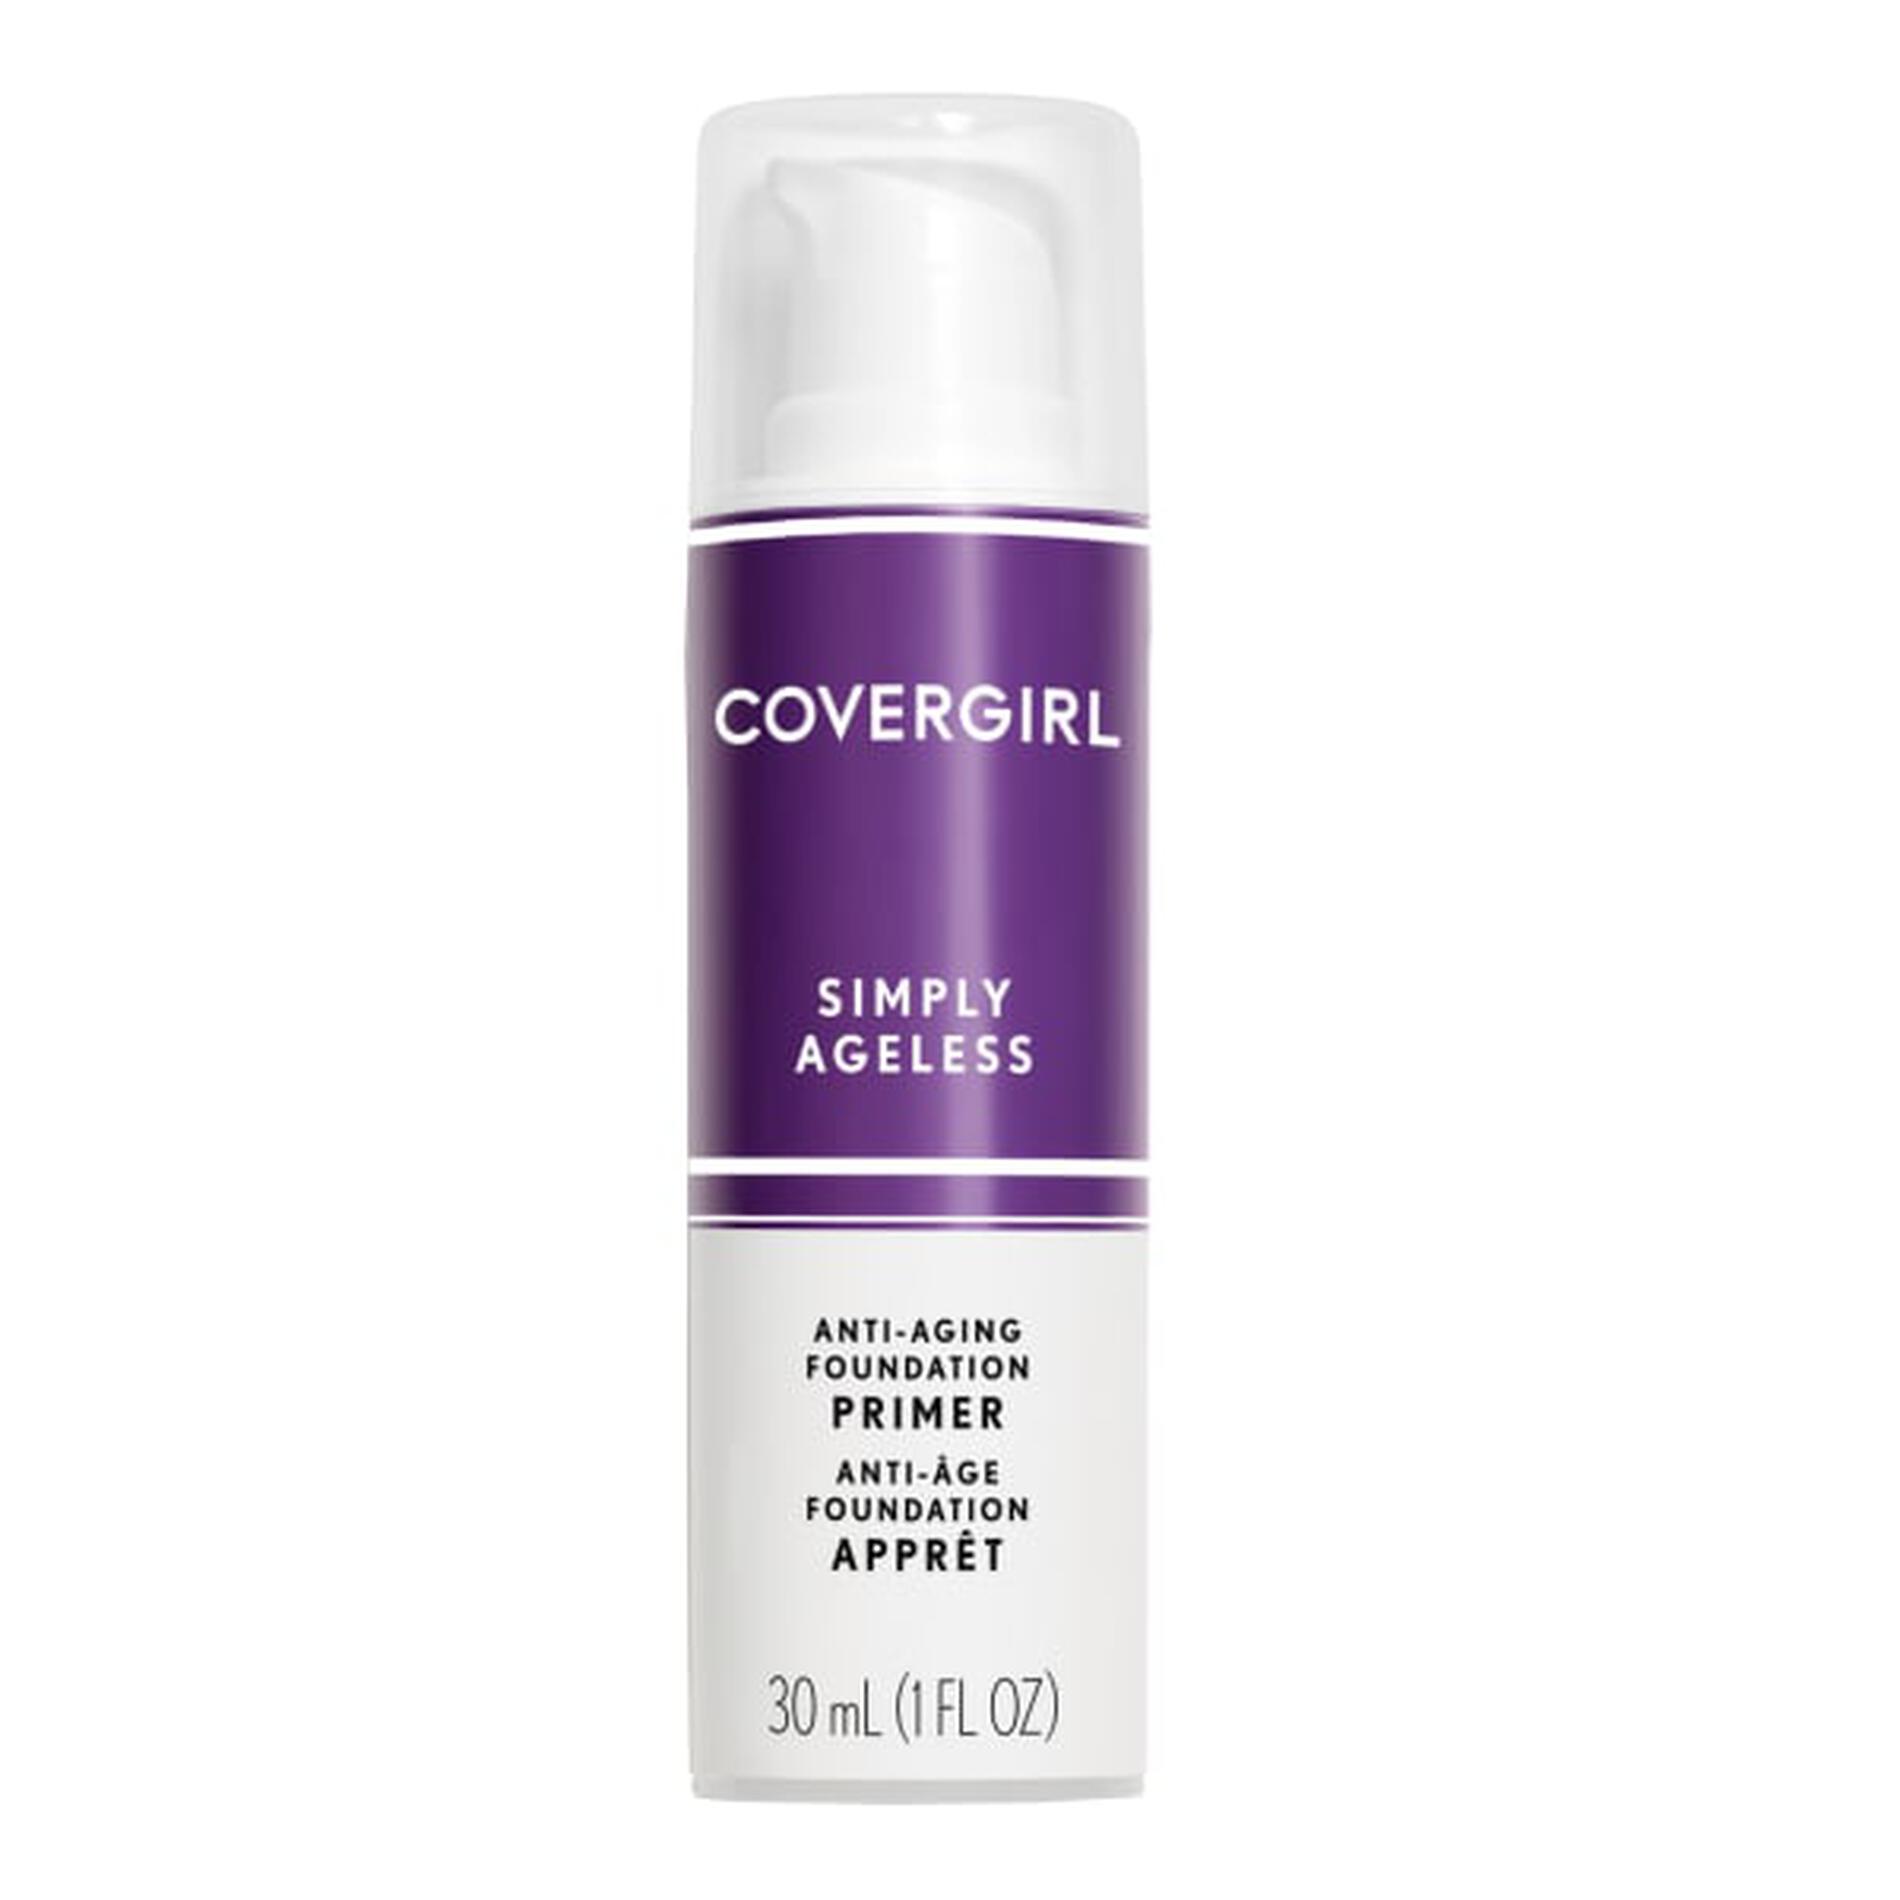 Covergirl Simply Ageless Makeup Primer